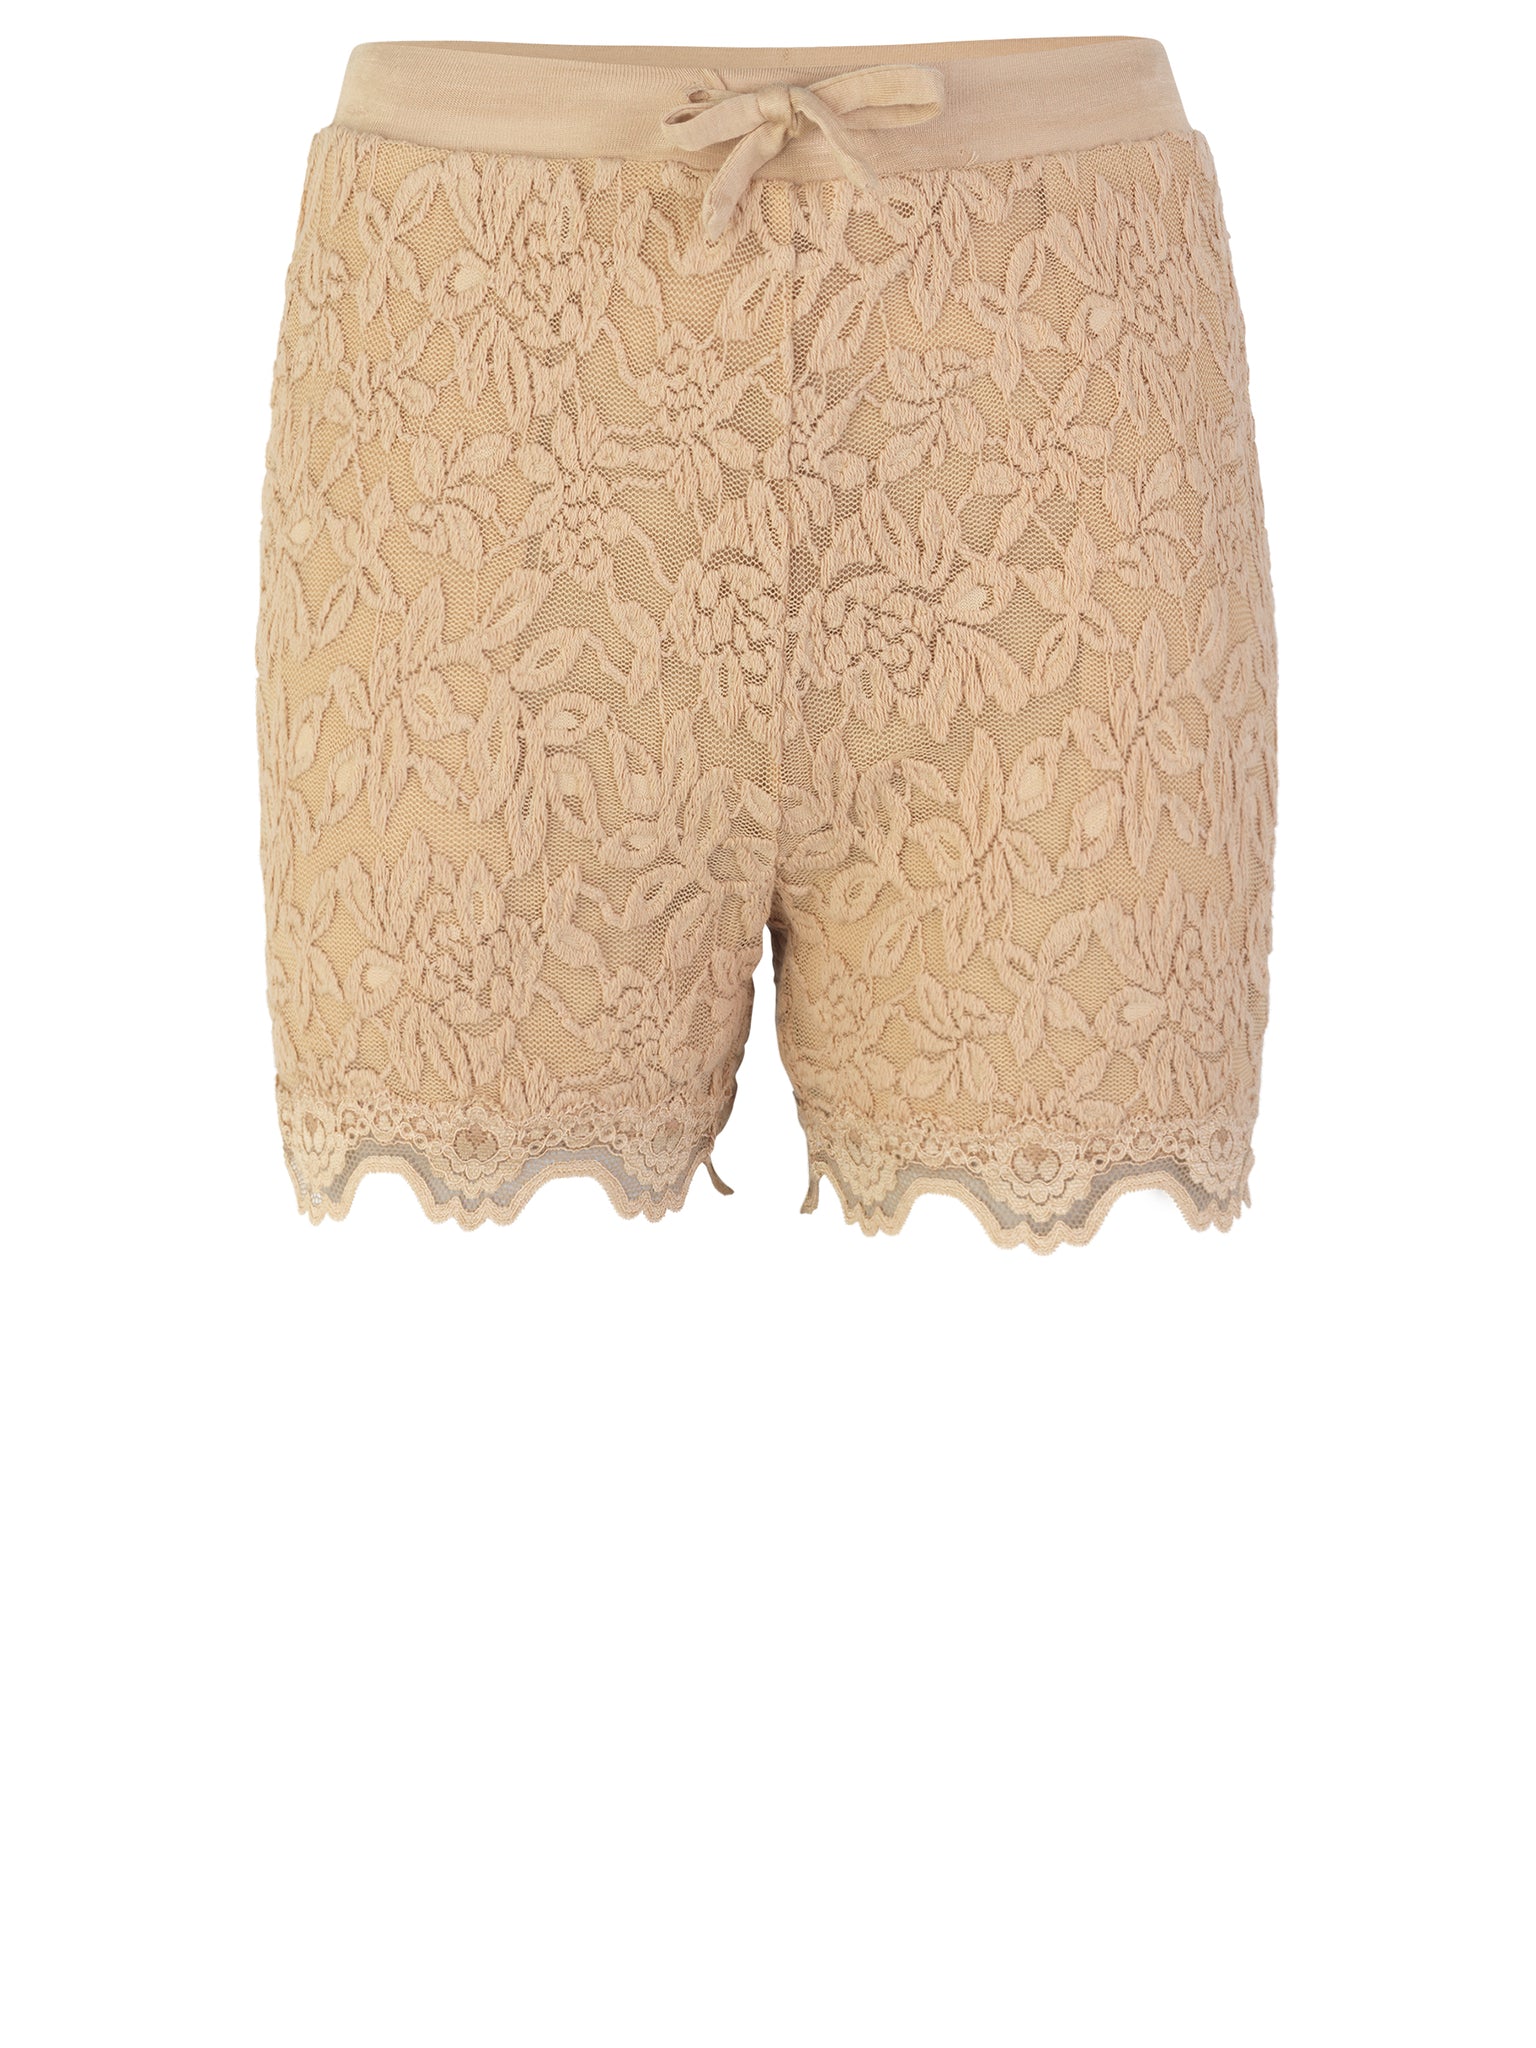 Lace shorts for girls